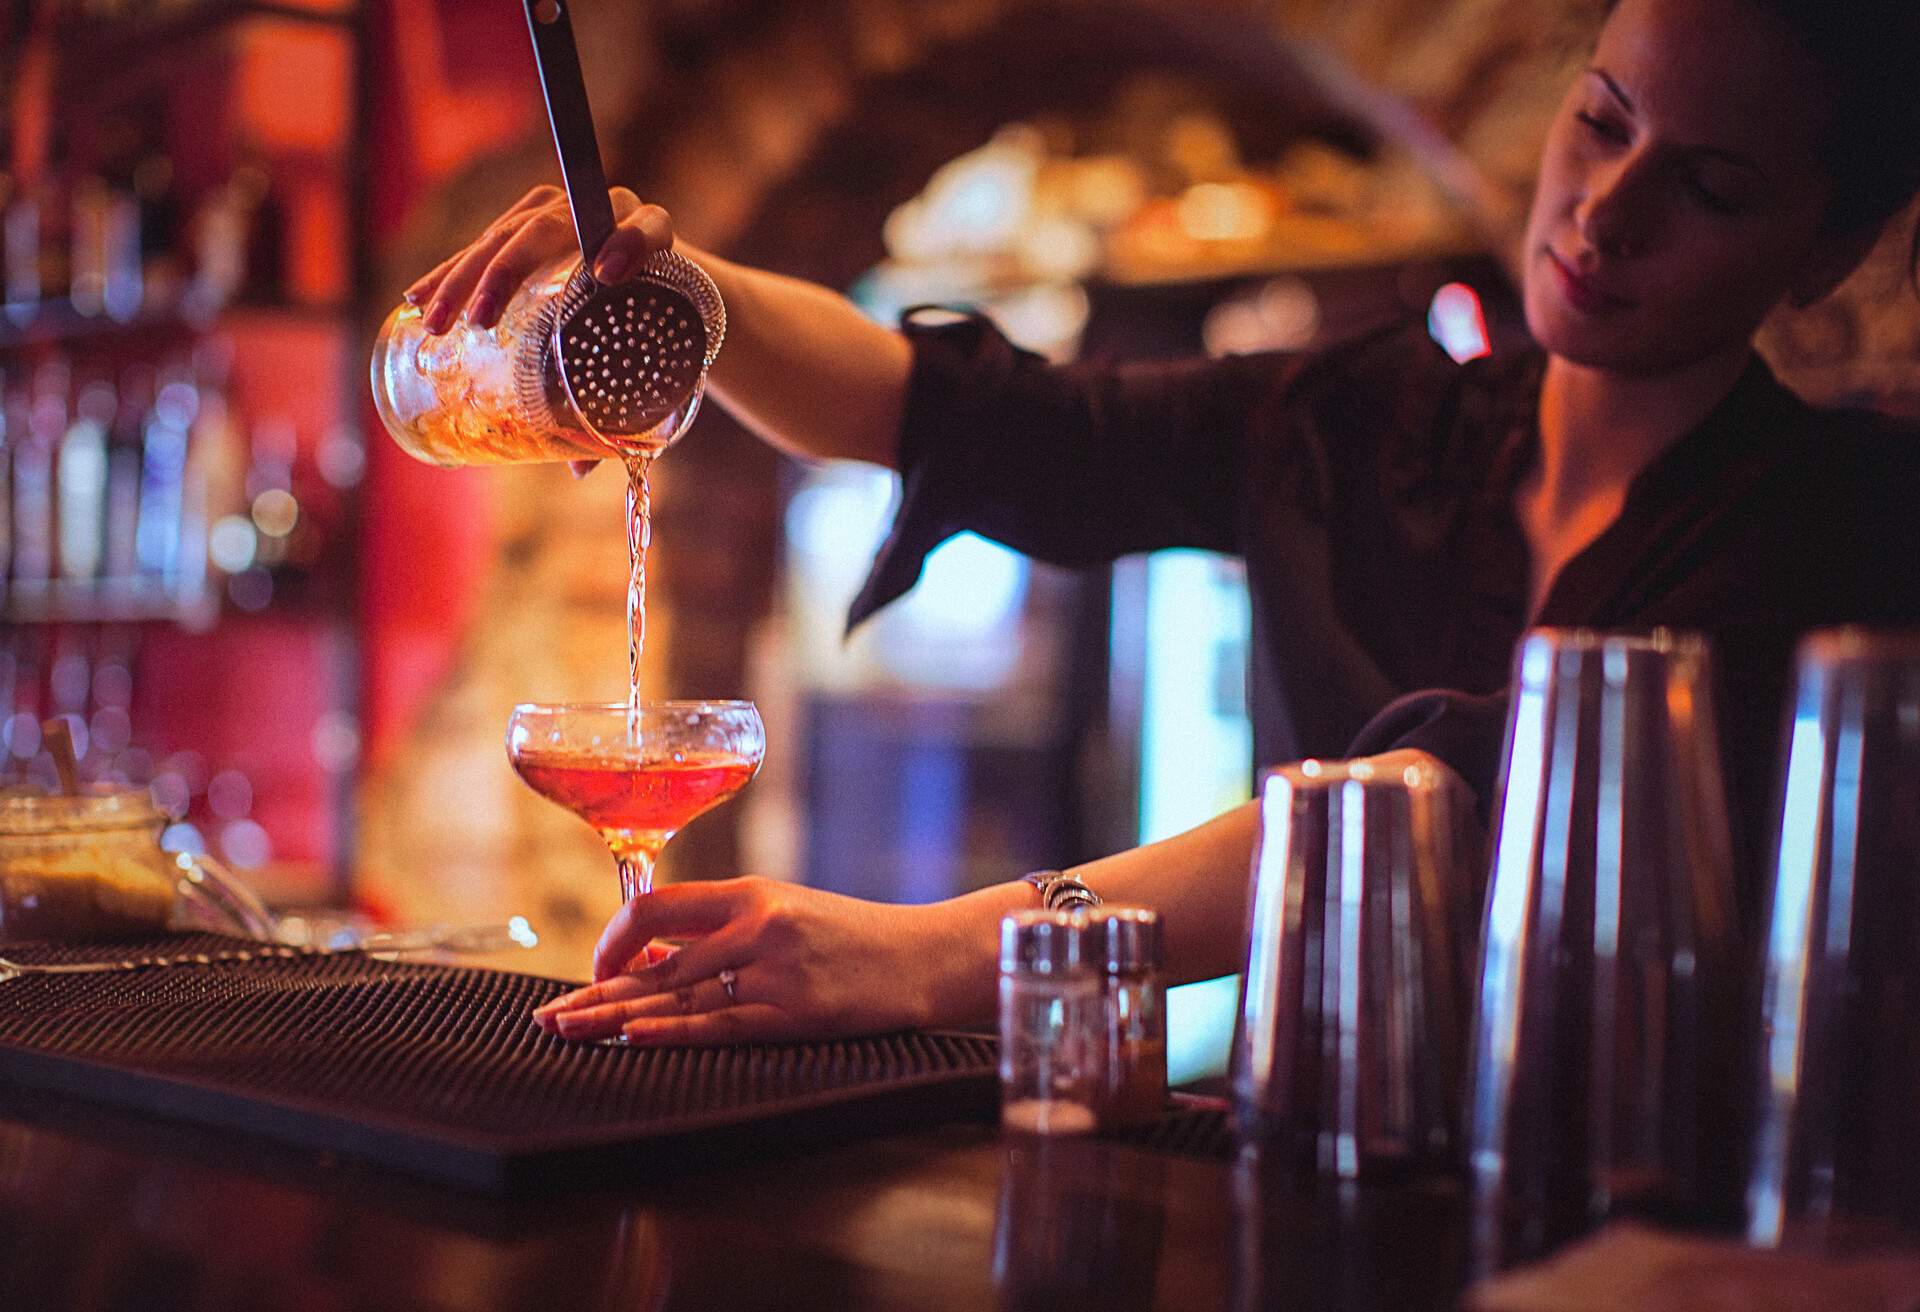 A bartender pouring a cocktail at the counter of a bar